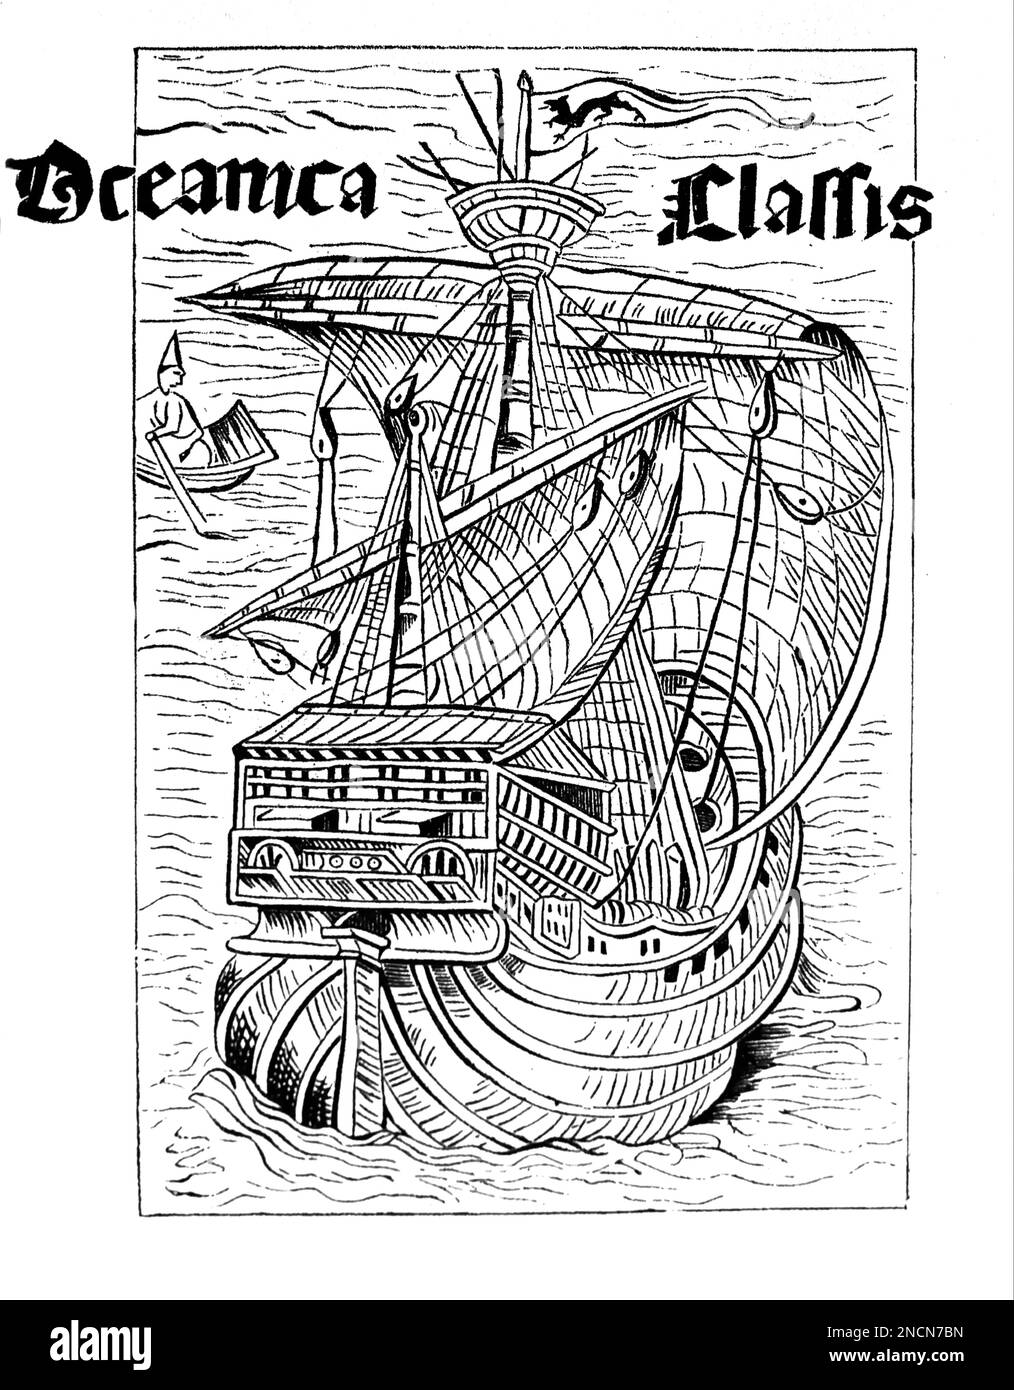 Spanish caravel 'La Pinta' which  Christopher Columbus discovered America in 1492. Engraving by Christopher Columbus. Stock Photo